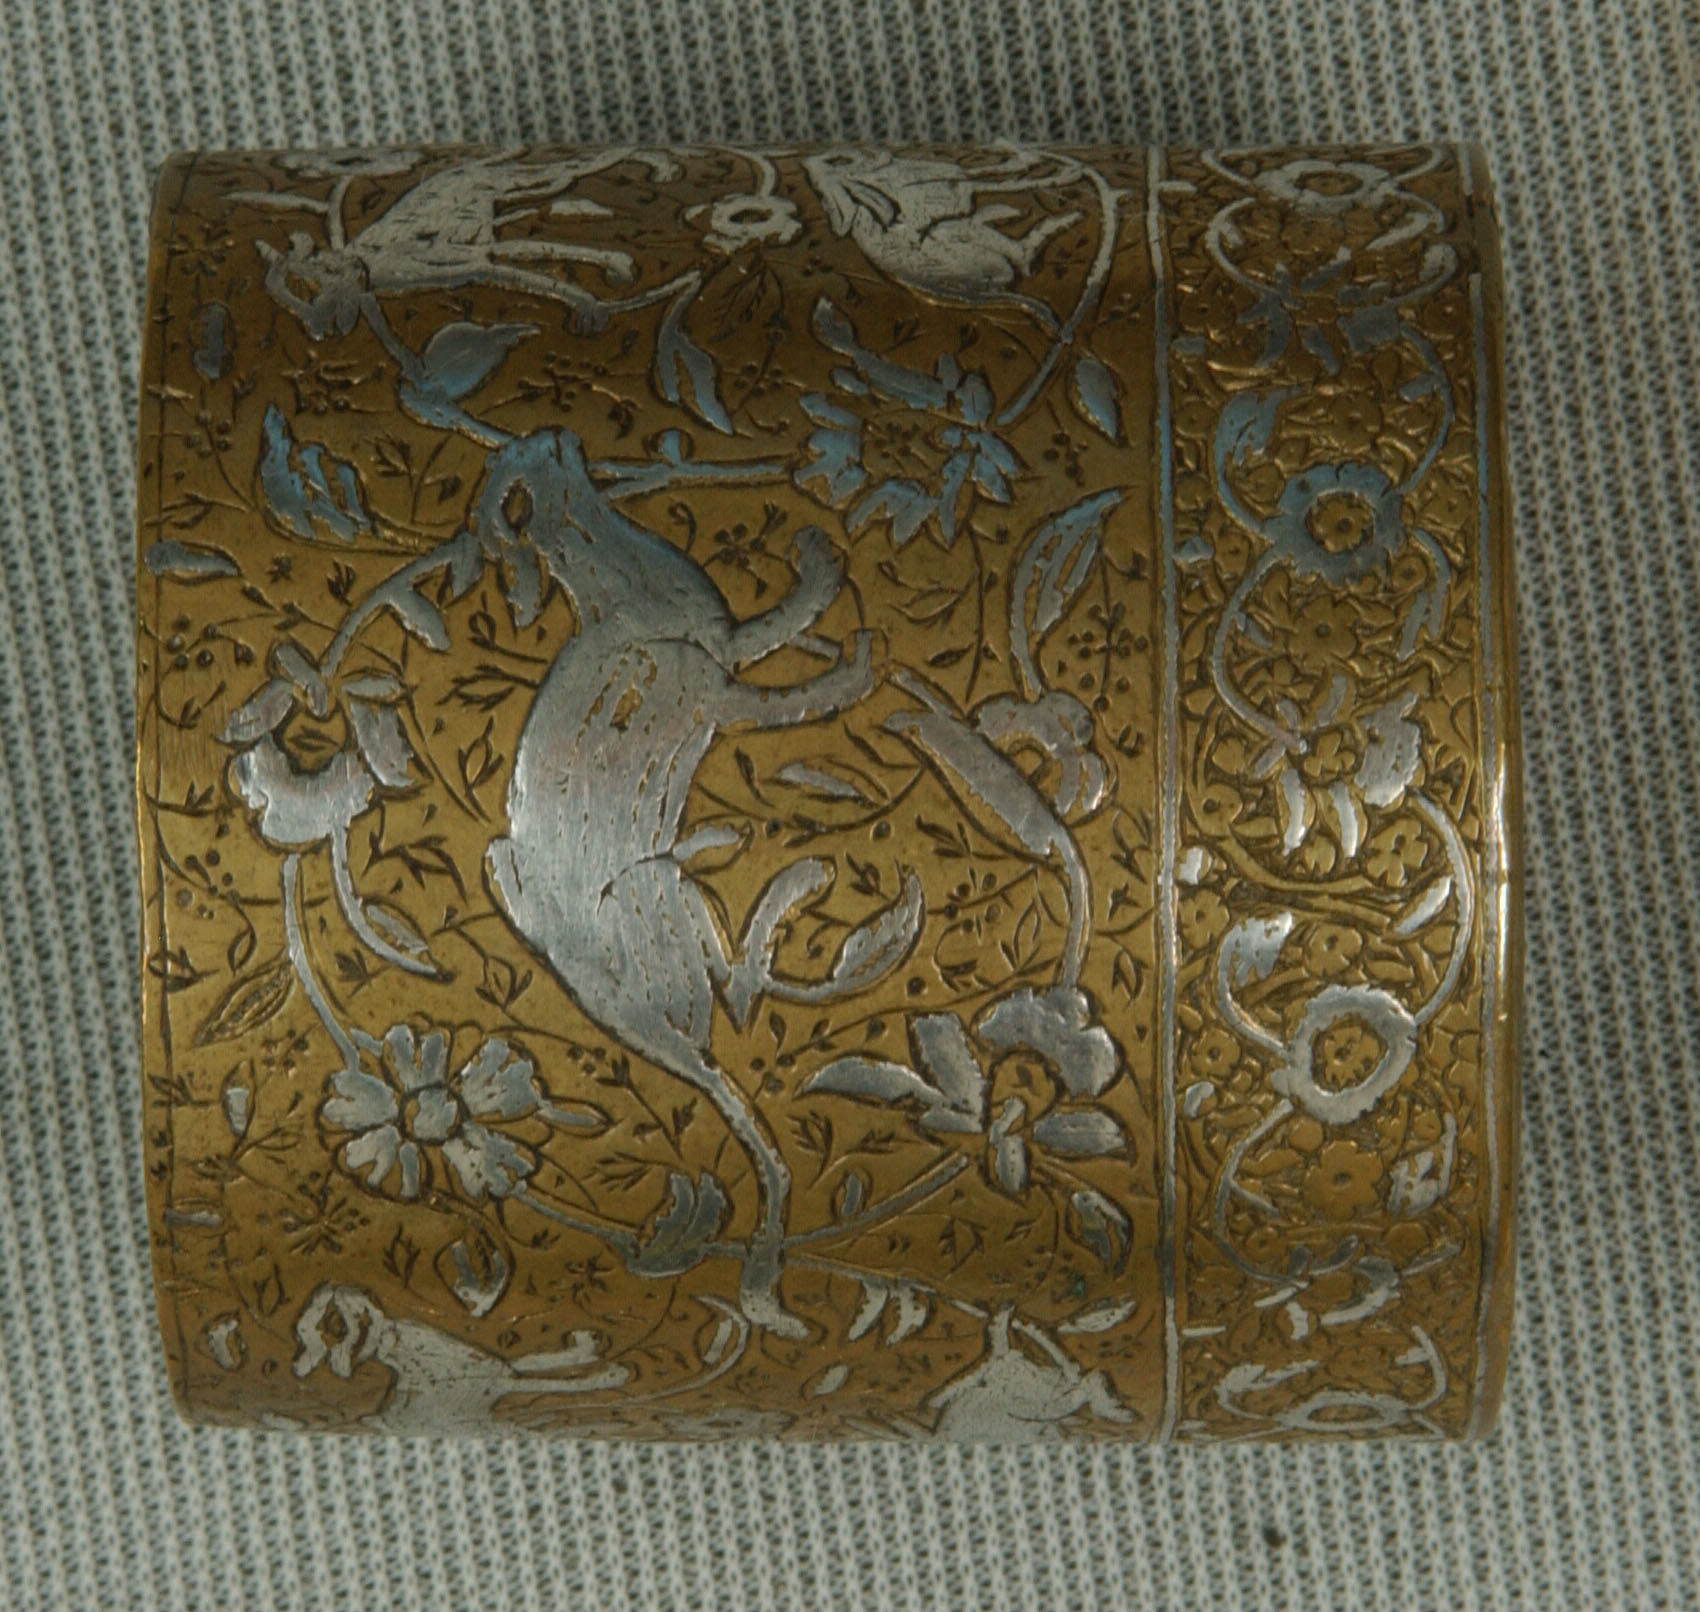 Inkwell with Floral and Animal Imagery | The Metropolitan Museum of Art